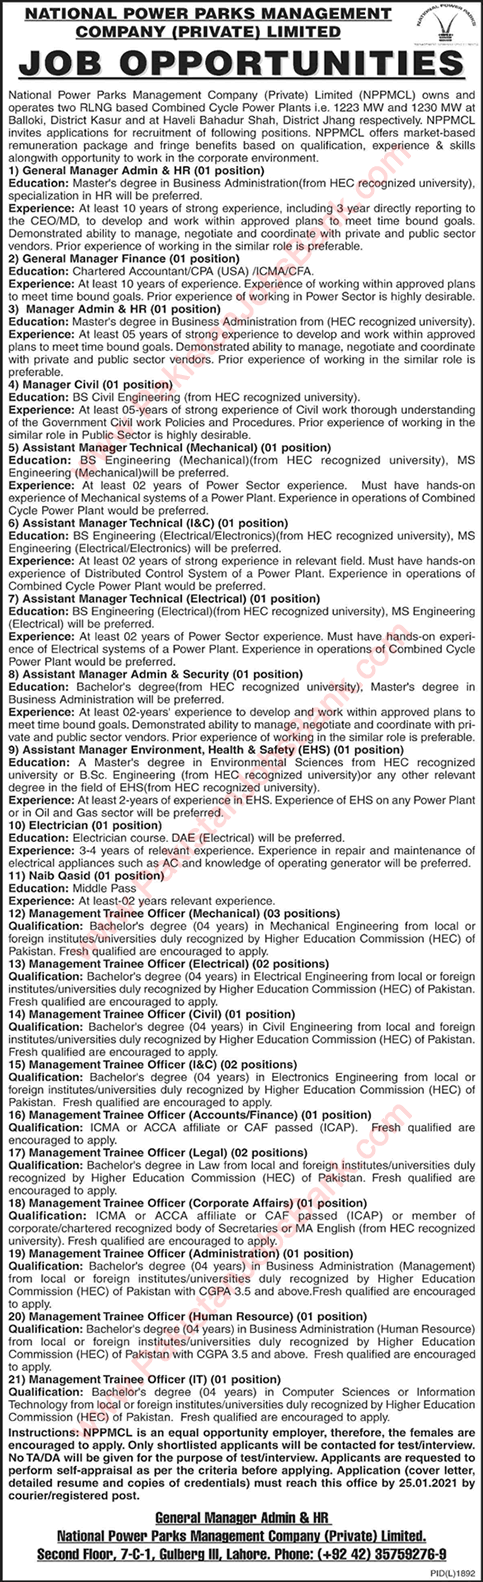 National Power Parks Management Company Jobs 2021 Management Trainee Officers & Others NPPMCL Latest